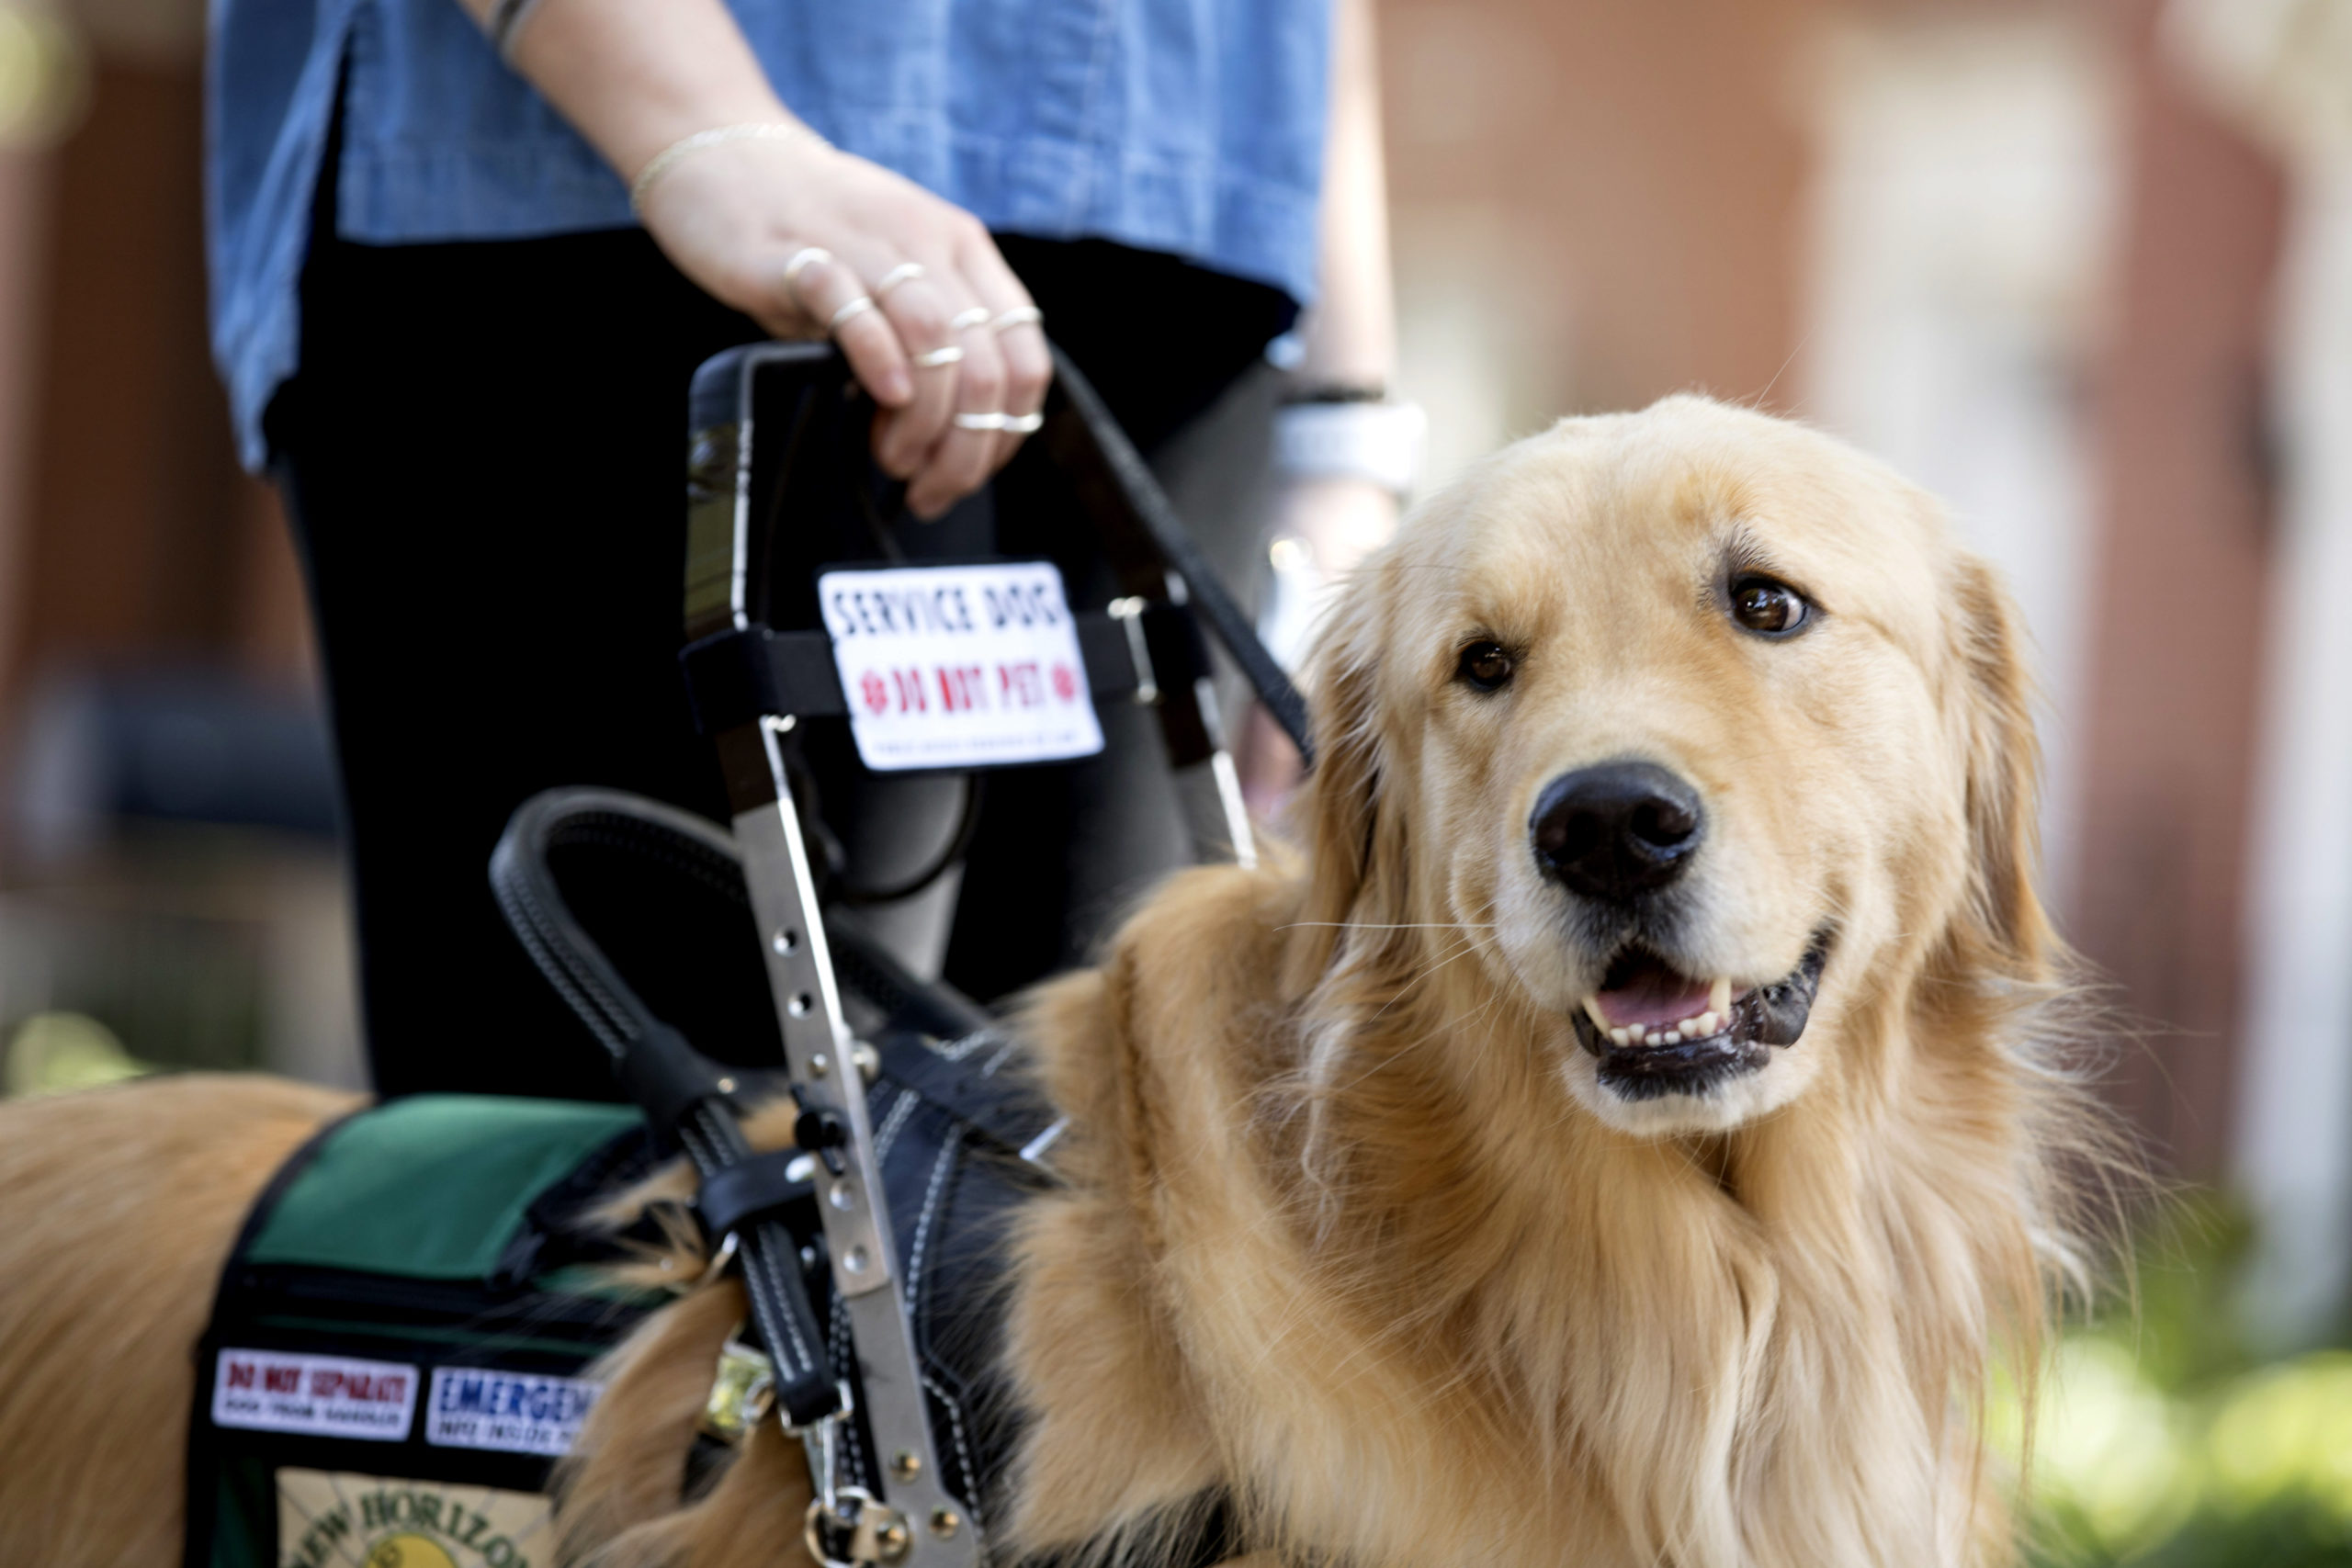 SPIA researcher calls attention to discrepancies in service animal policies